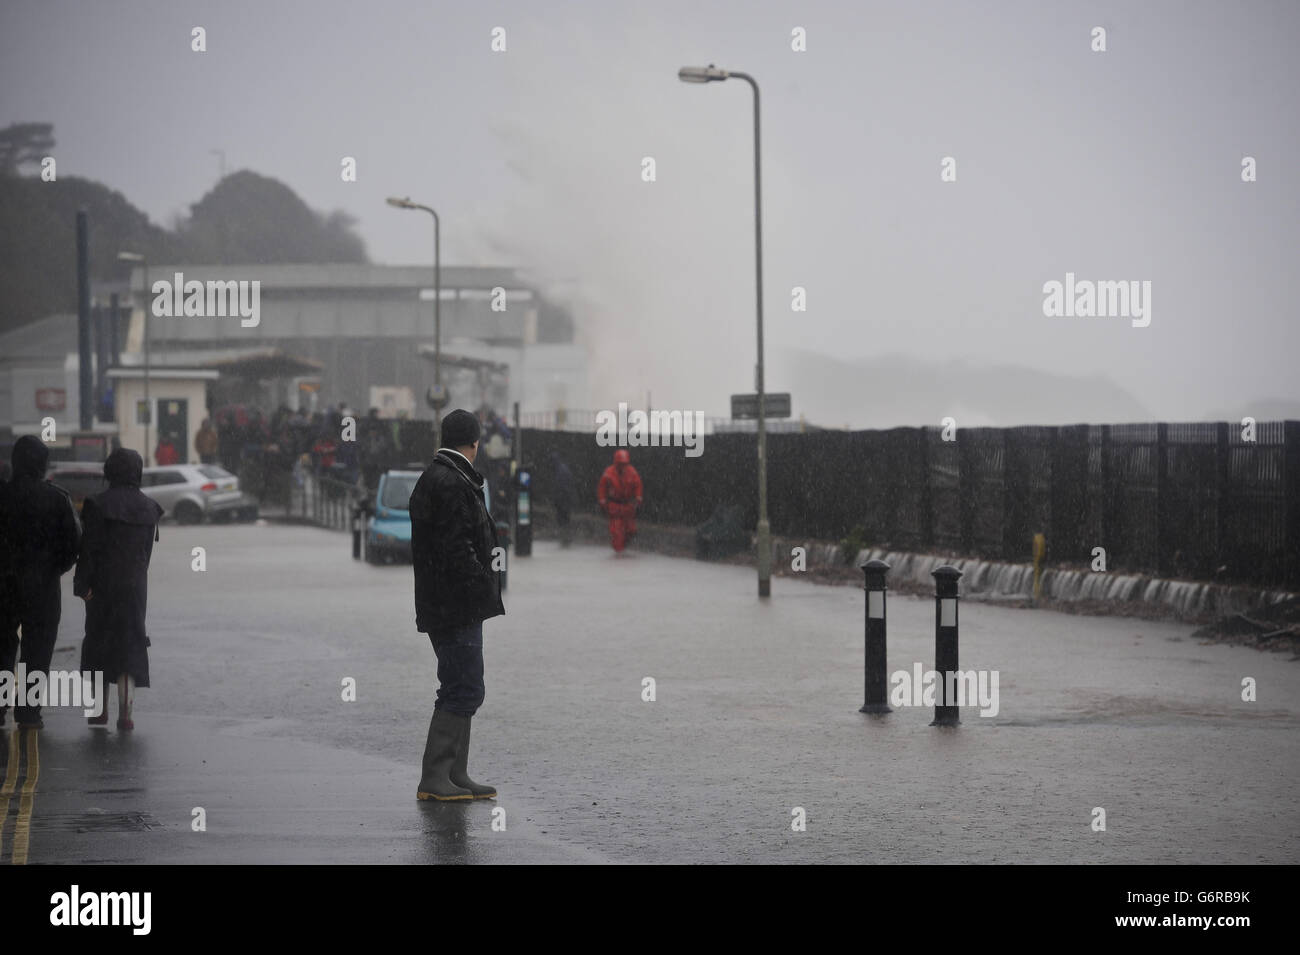 A man in the torrential rain in Dawlish, where high tides and strong winds have created havoc in the Devonshire town disrupting road and rail networks and damaging property. Stock Photo